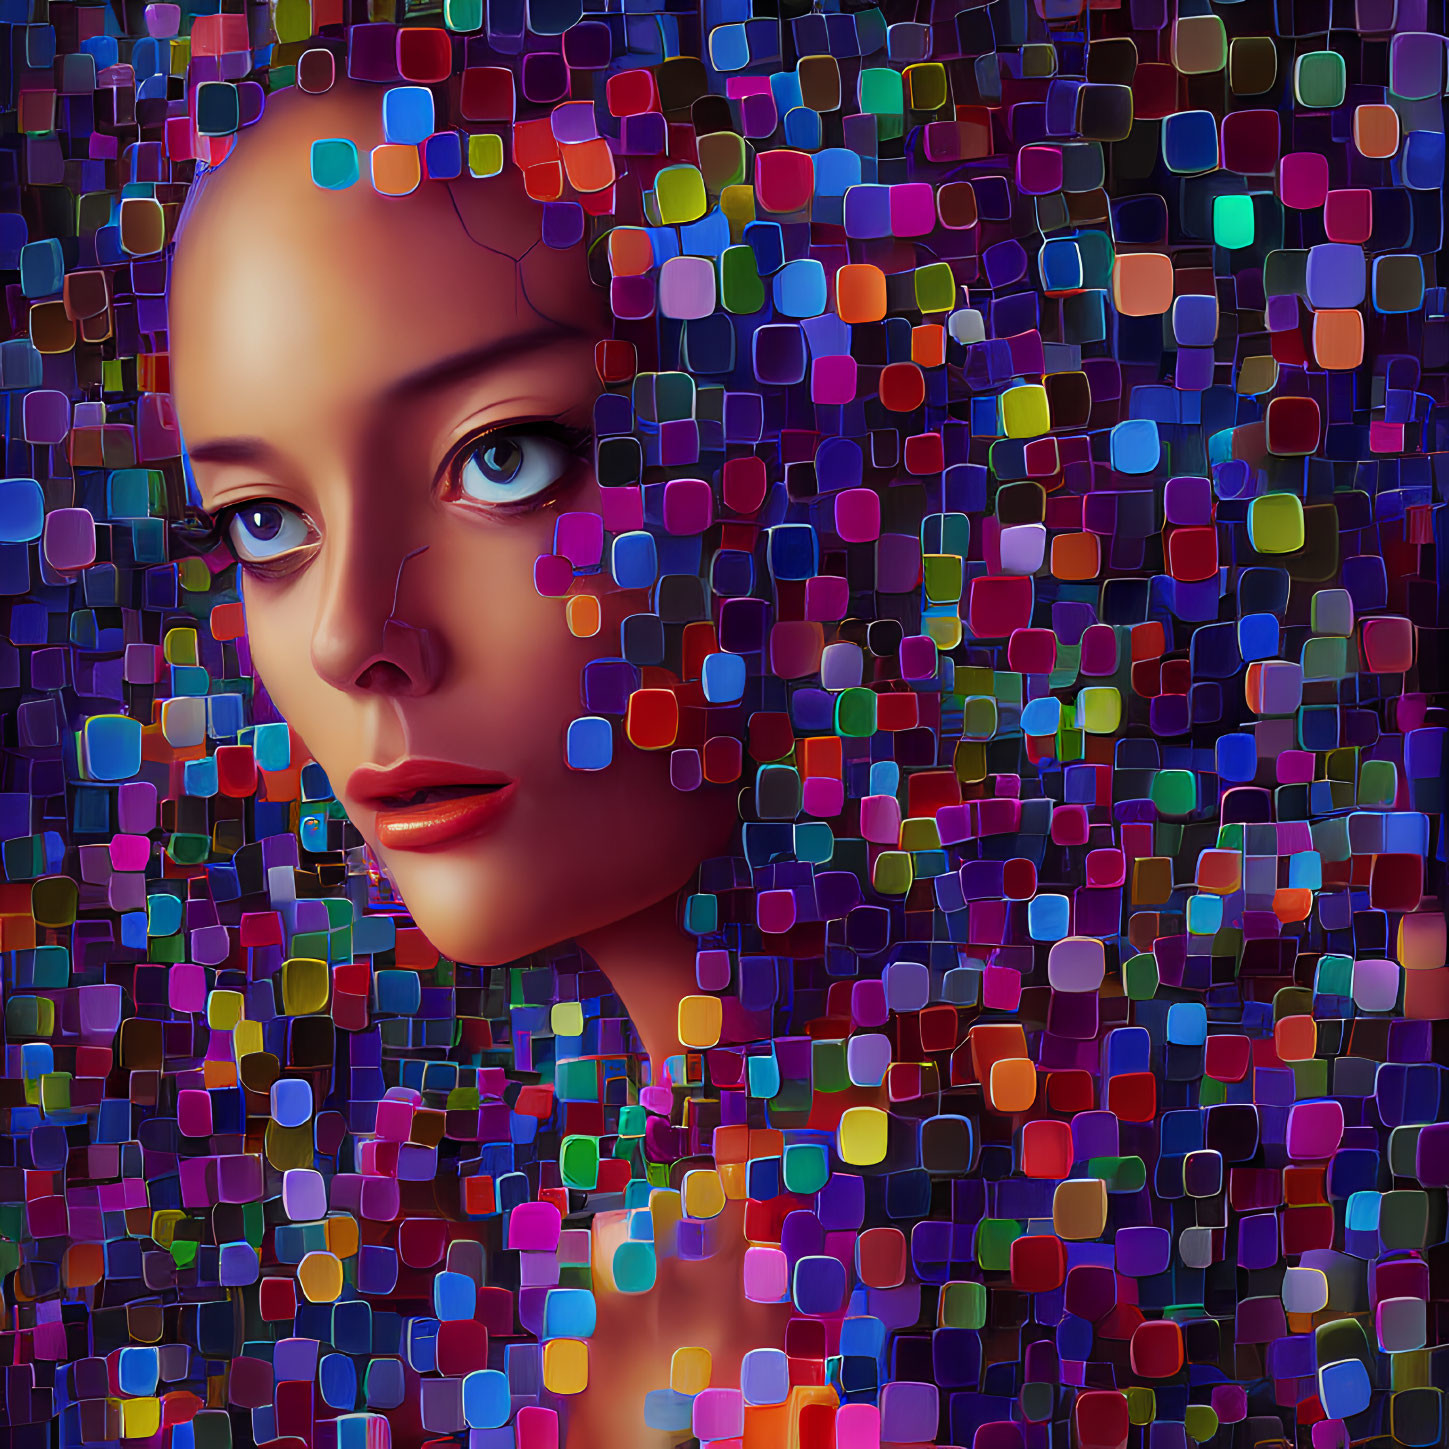 Colorful Geometric Fragmented Face Artwork on Dark Background